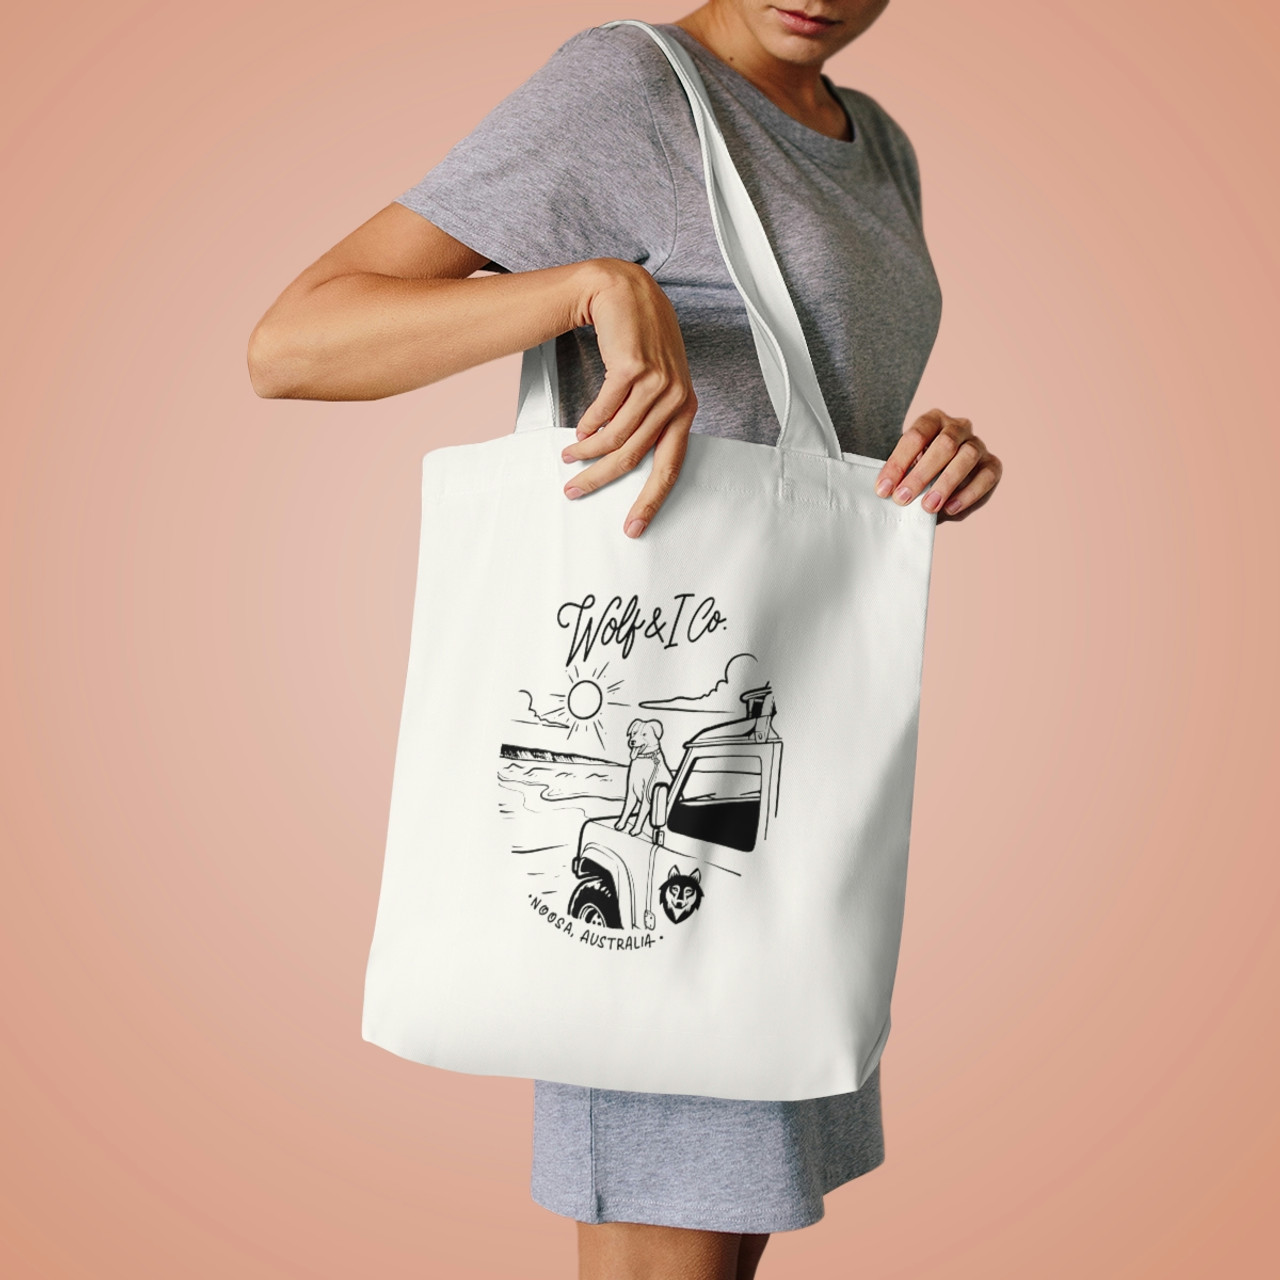 Small Cotton Tote Bags (50 Counts) 10